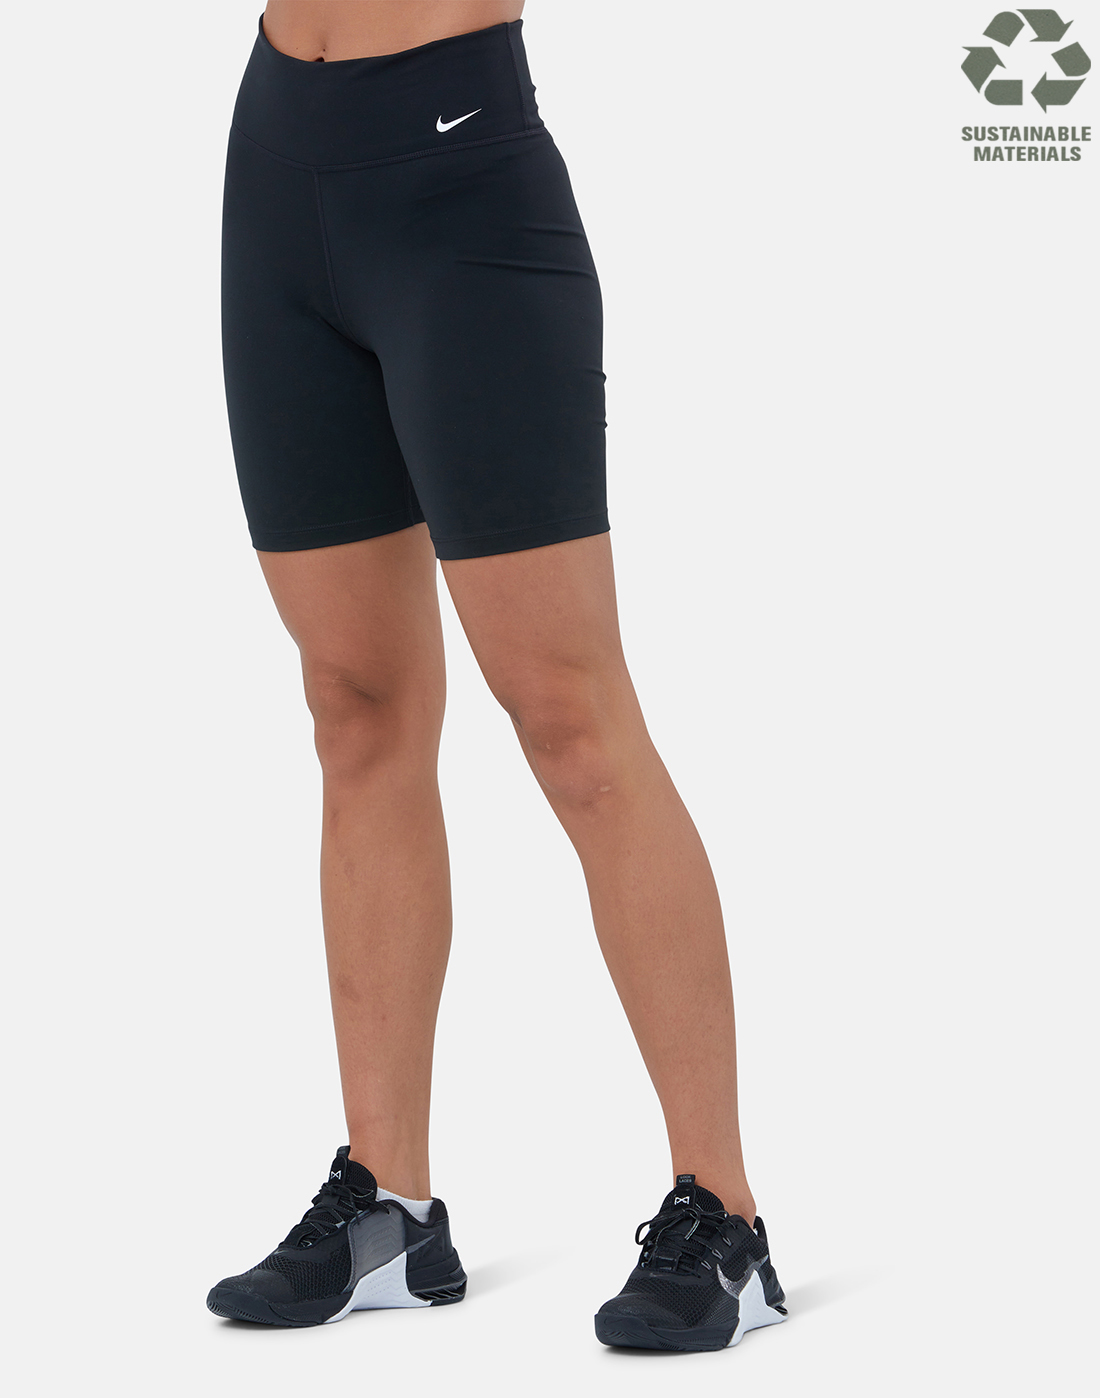 Nike Womens One 7 Inch Shorts - Black | Life Style Sports IE